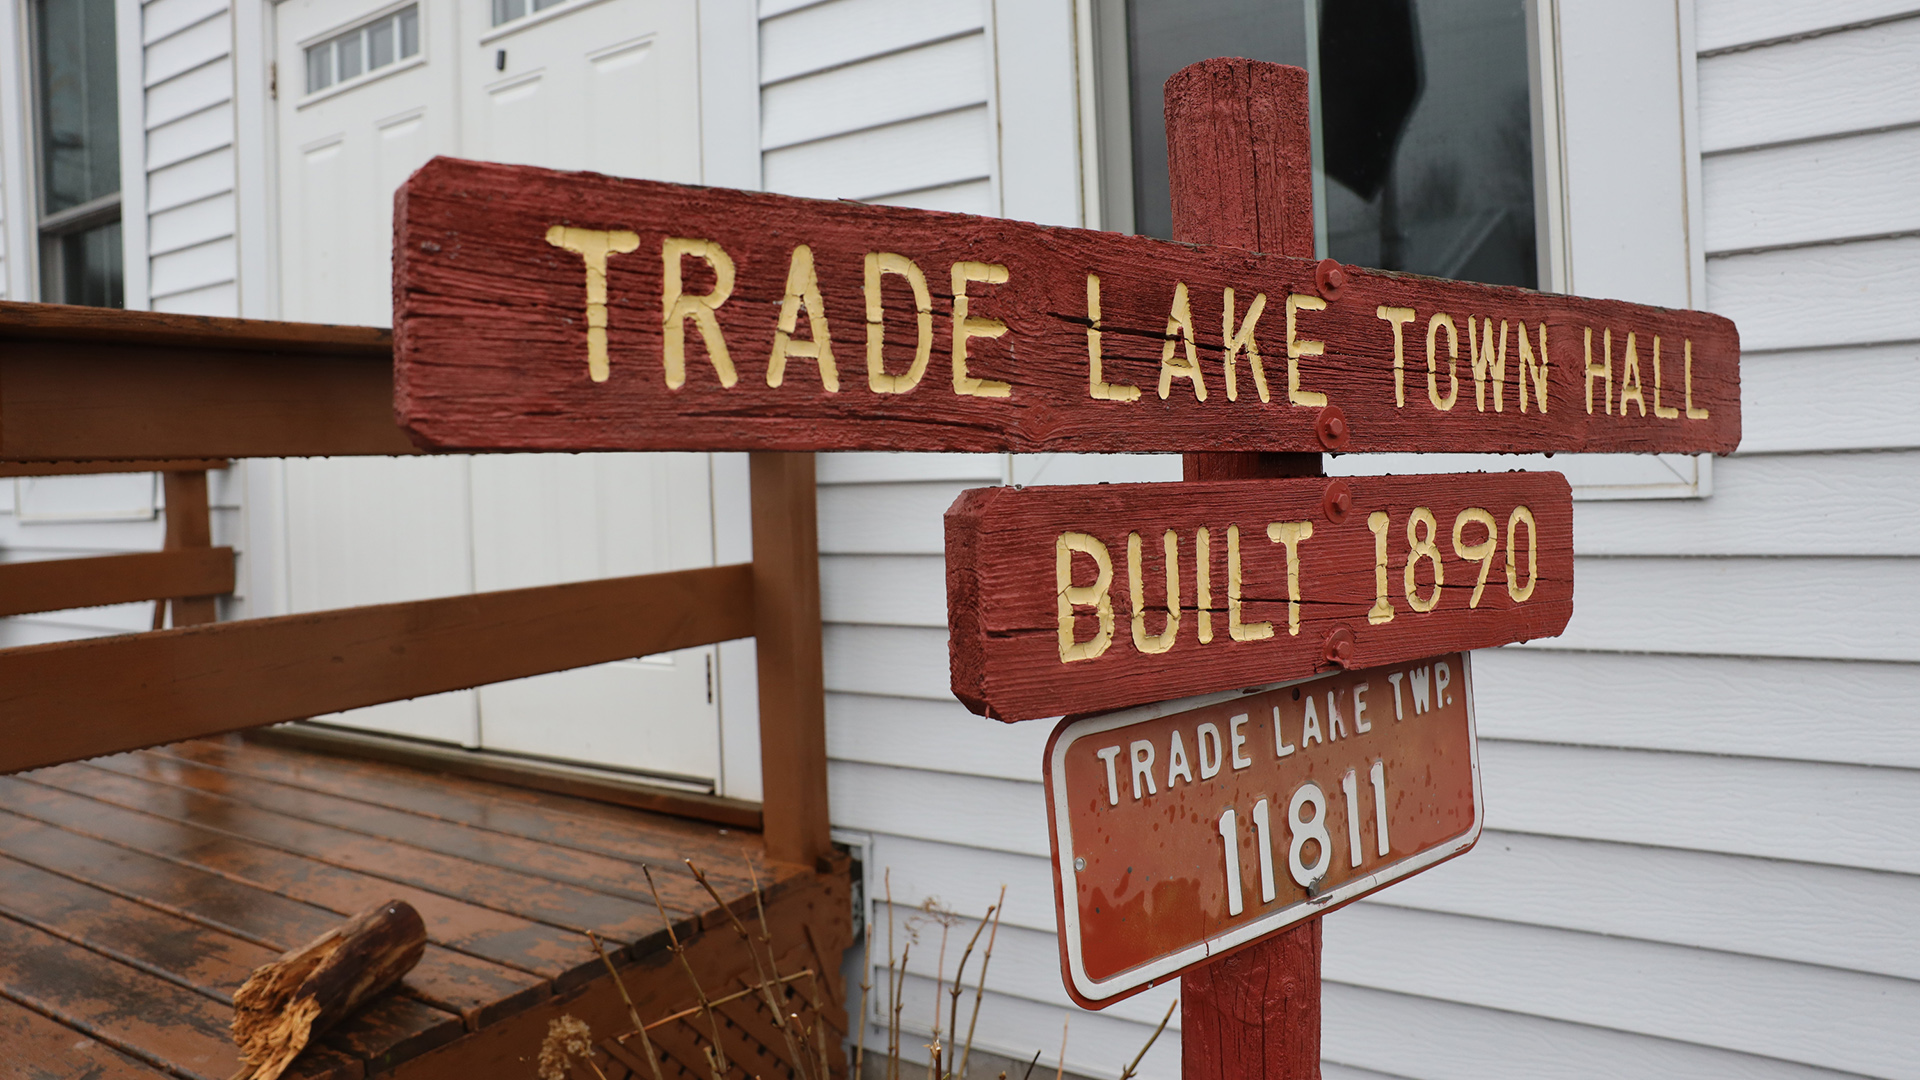 A wood sign with engraved painted letters reads "Trade Lake Town Hall" and "Built 1890" along with a metal address sign reading "Trade Lake Twp. 11811" stands in front of a building with two windows framing double doors in front of a wood ramp.